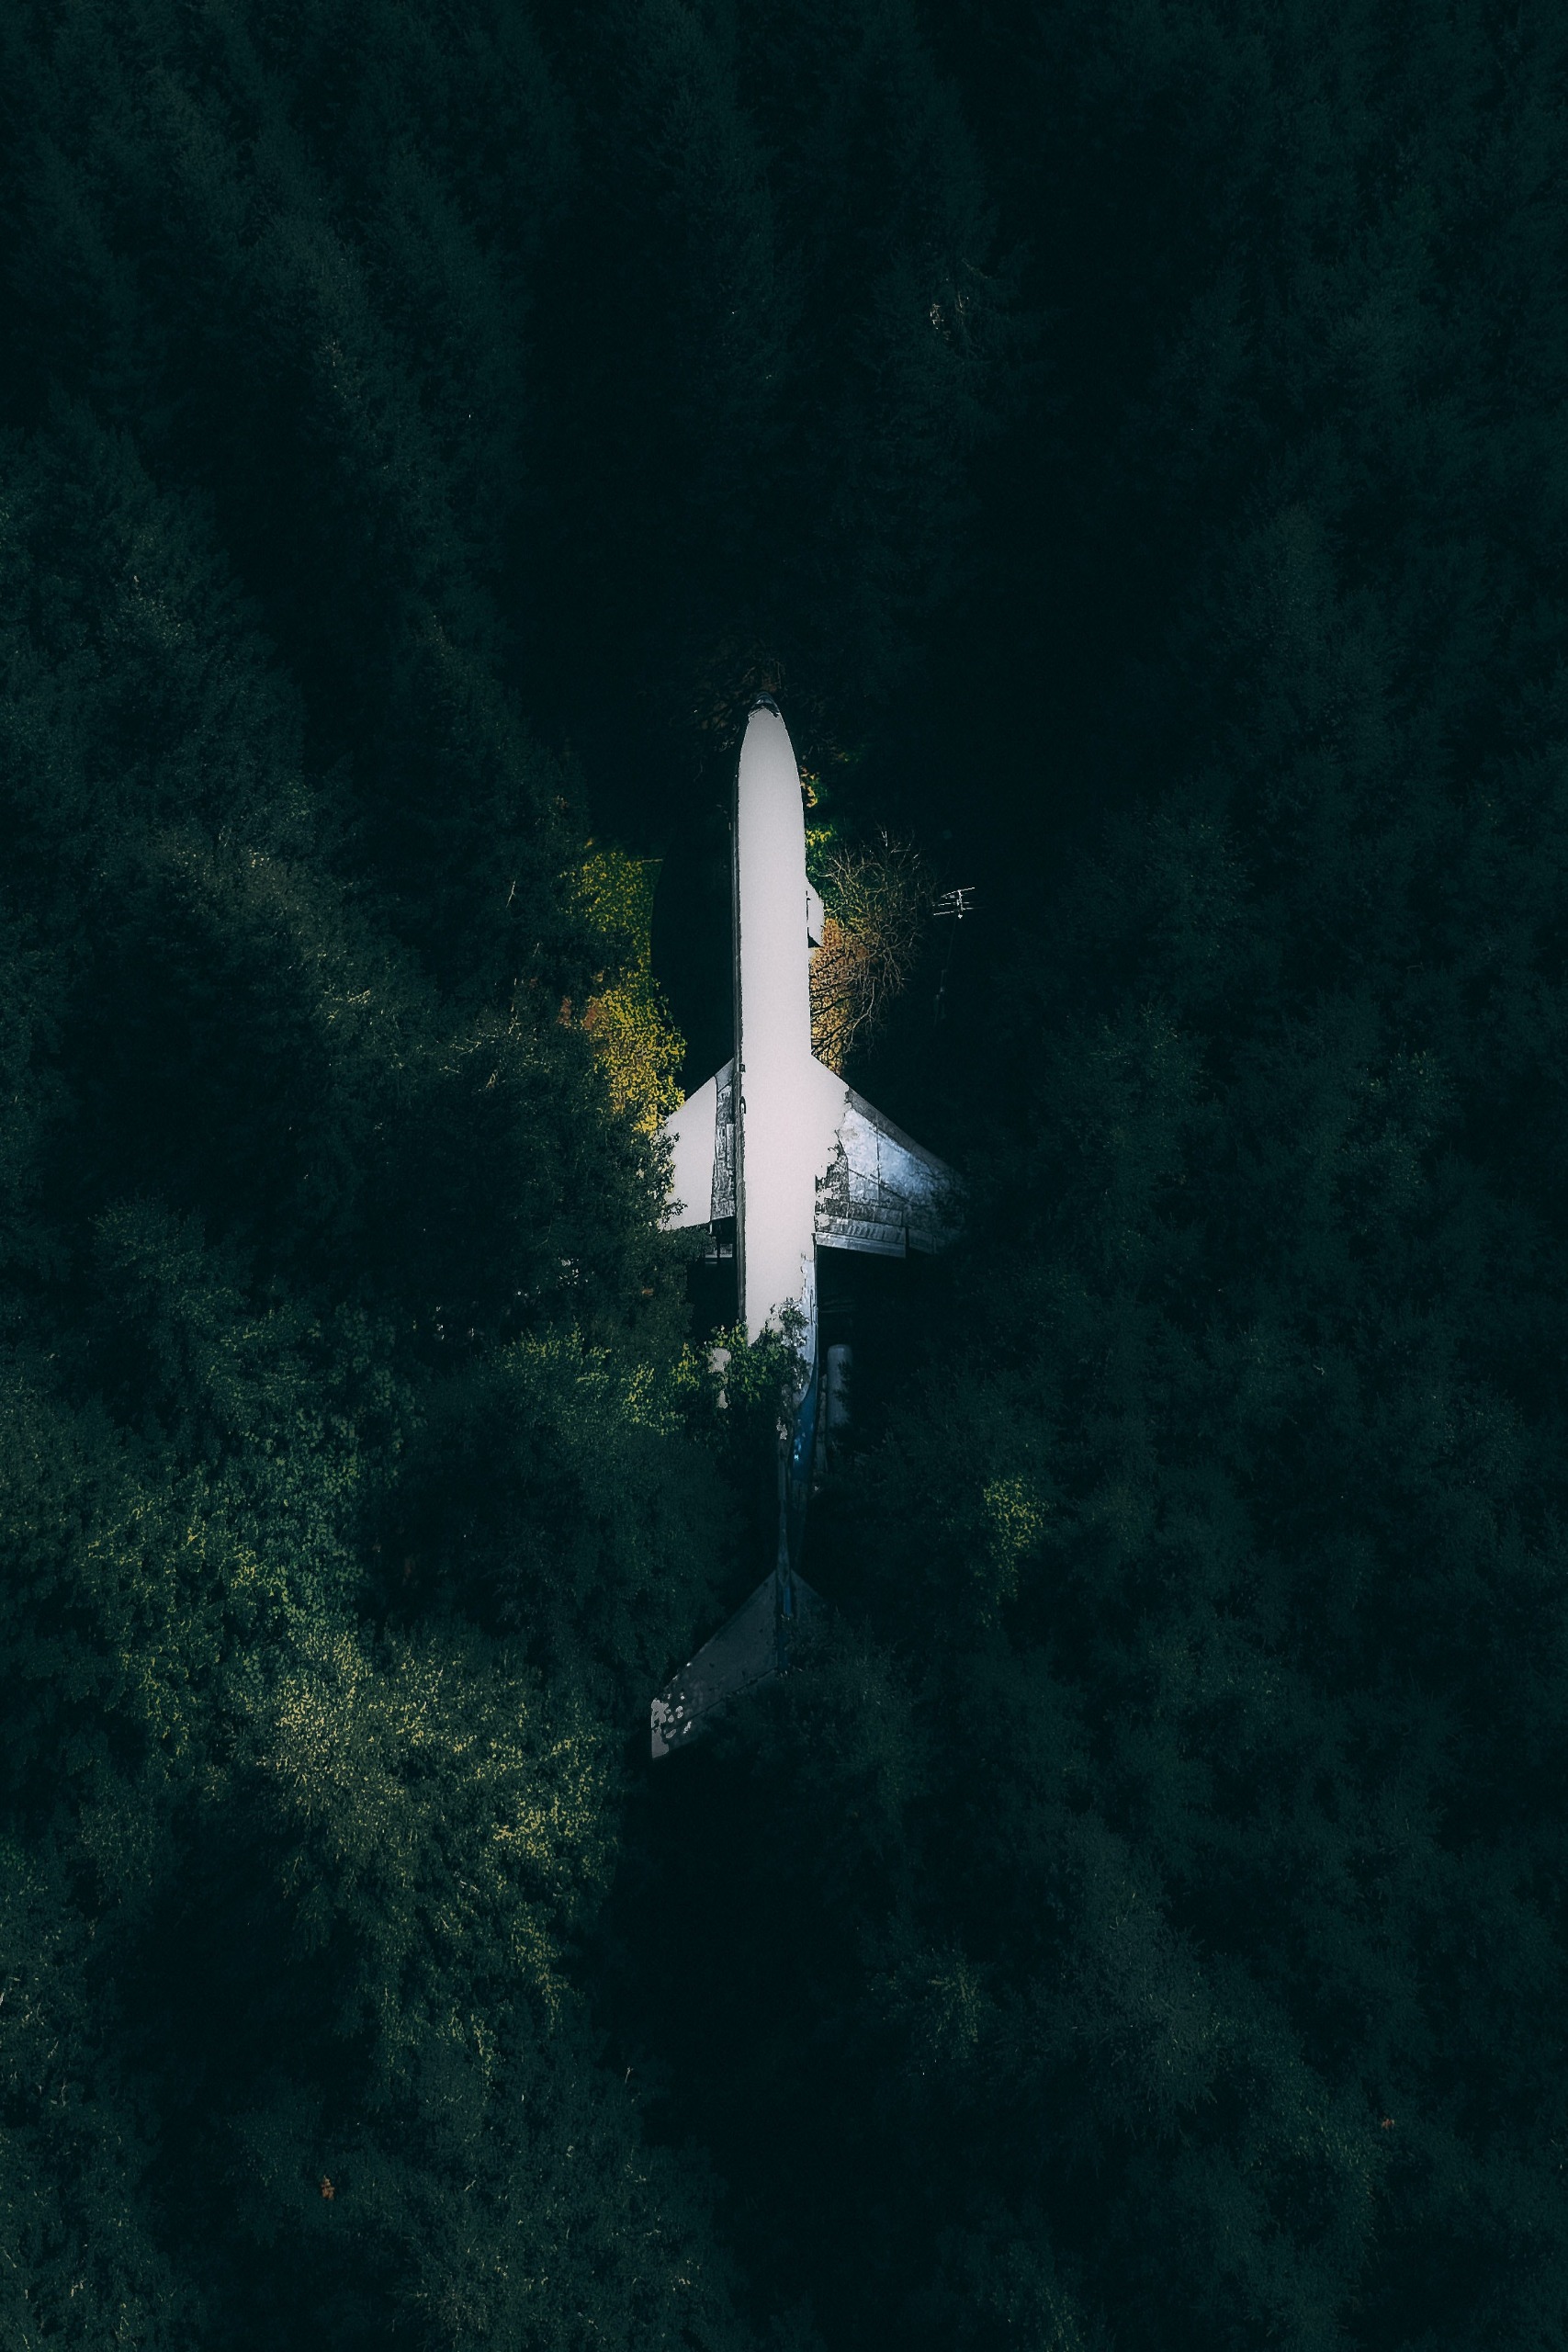 View from above of a wreckage of a white plane in the middle of a forest